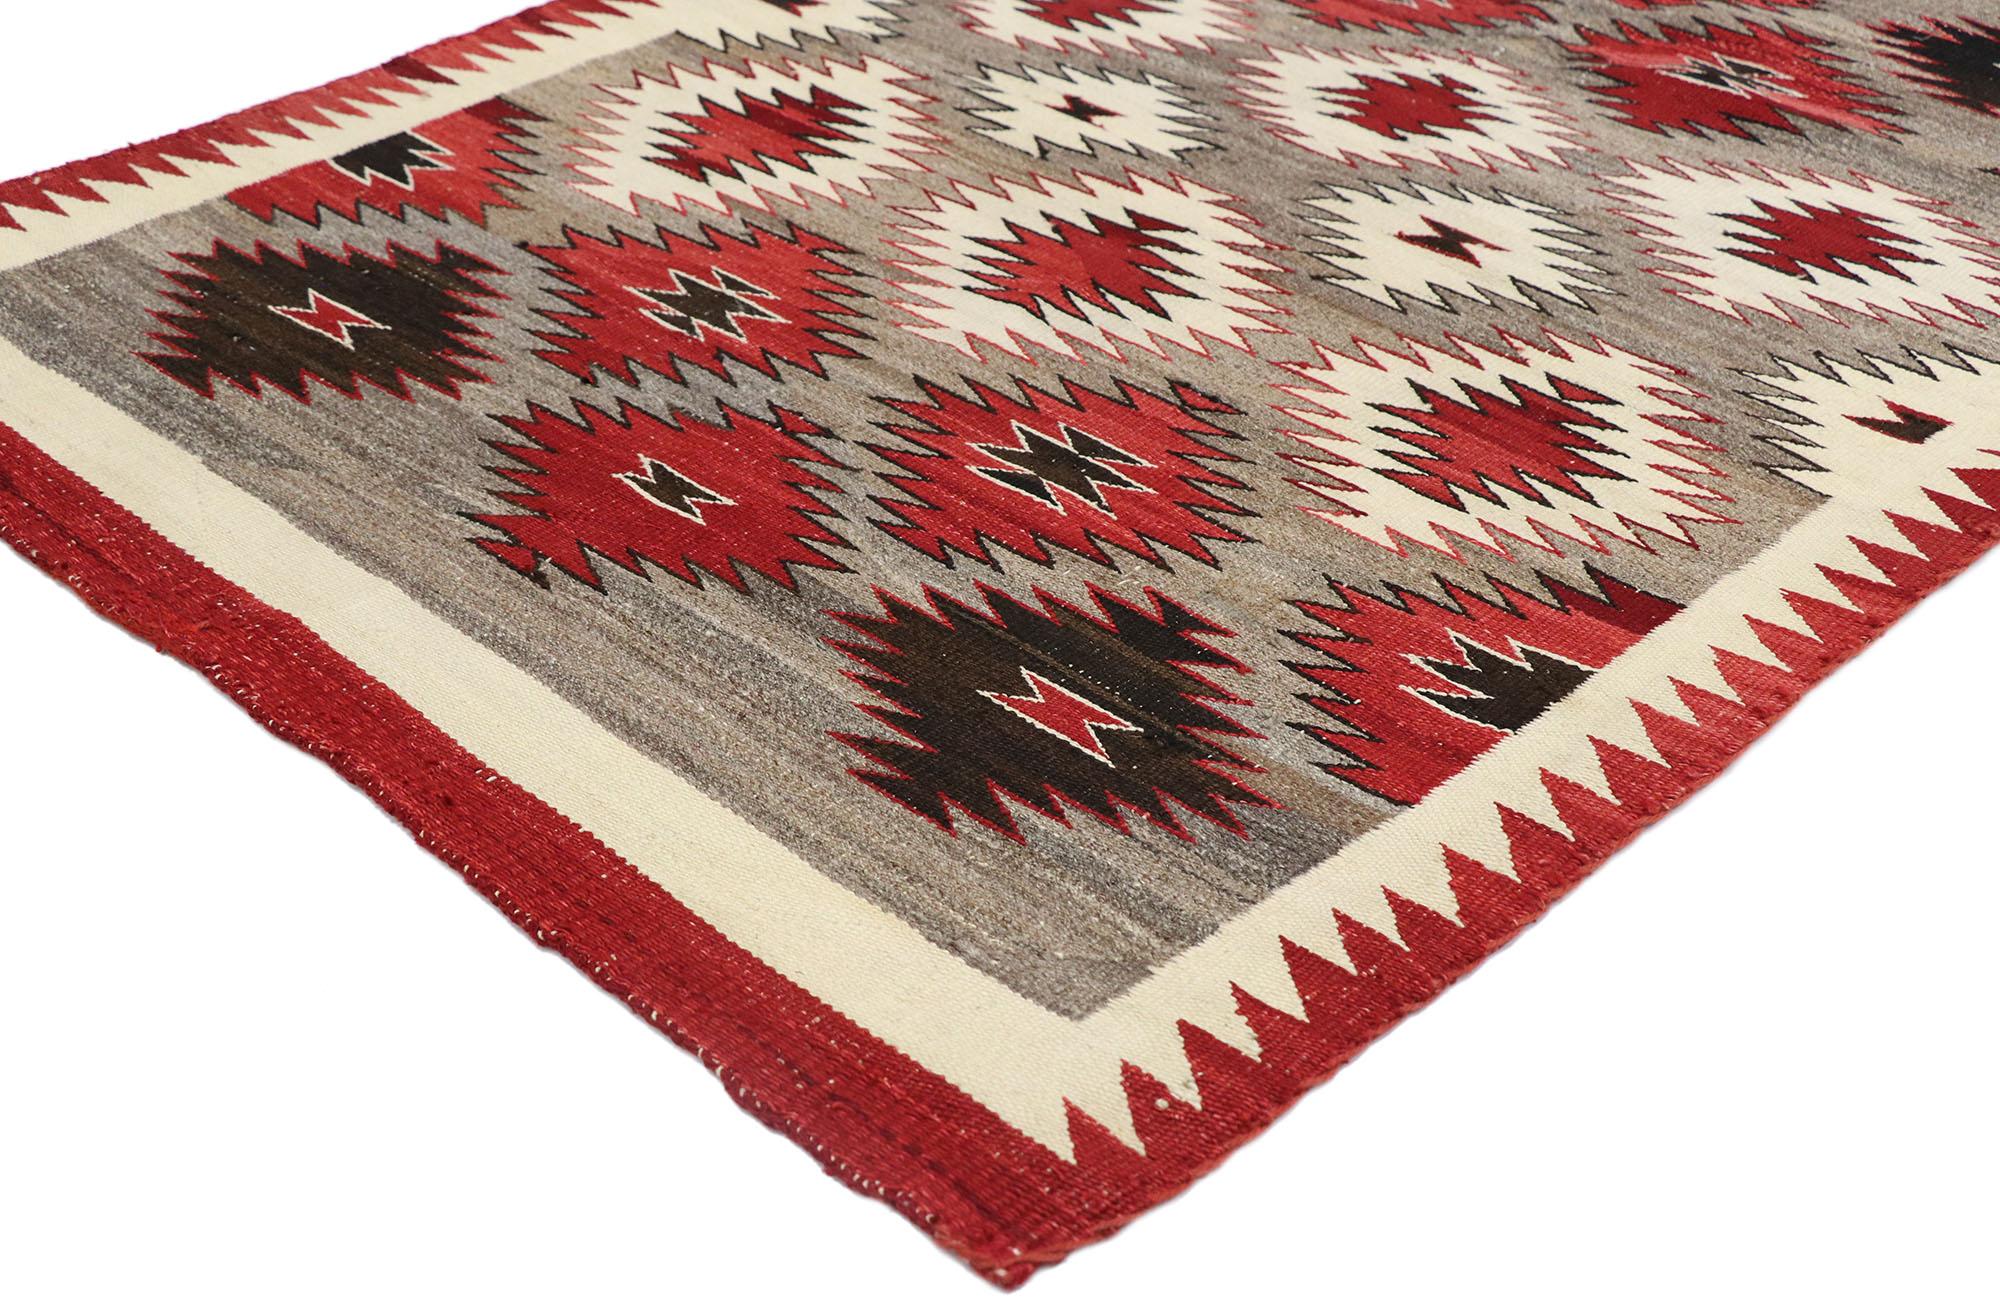 77765 vintage Navajo Kilim rug with two grey hills style 03'02 x 04'04. With its bold expressive design, incredible detail and texture, this hand-woven wool vintage Navajo Kilim rug is a captivating vision of woven beauty highlighting Native